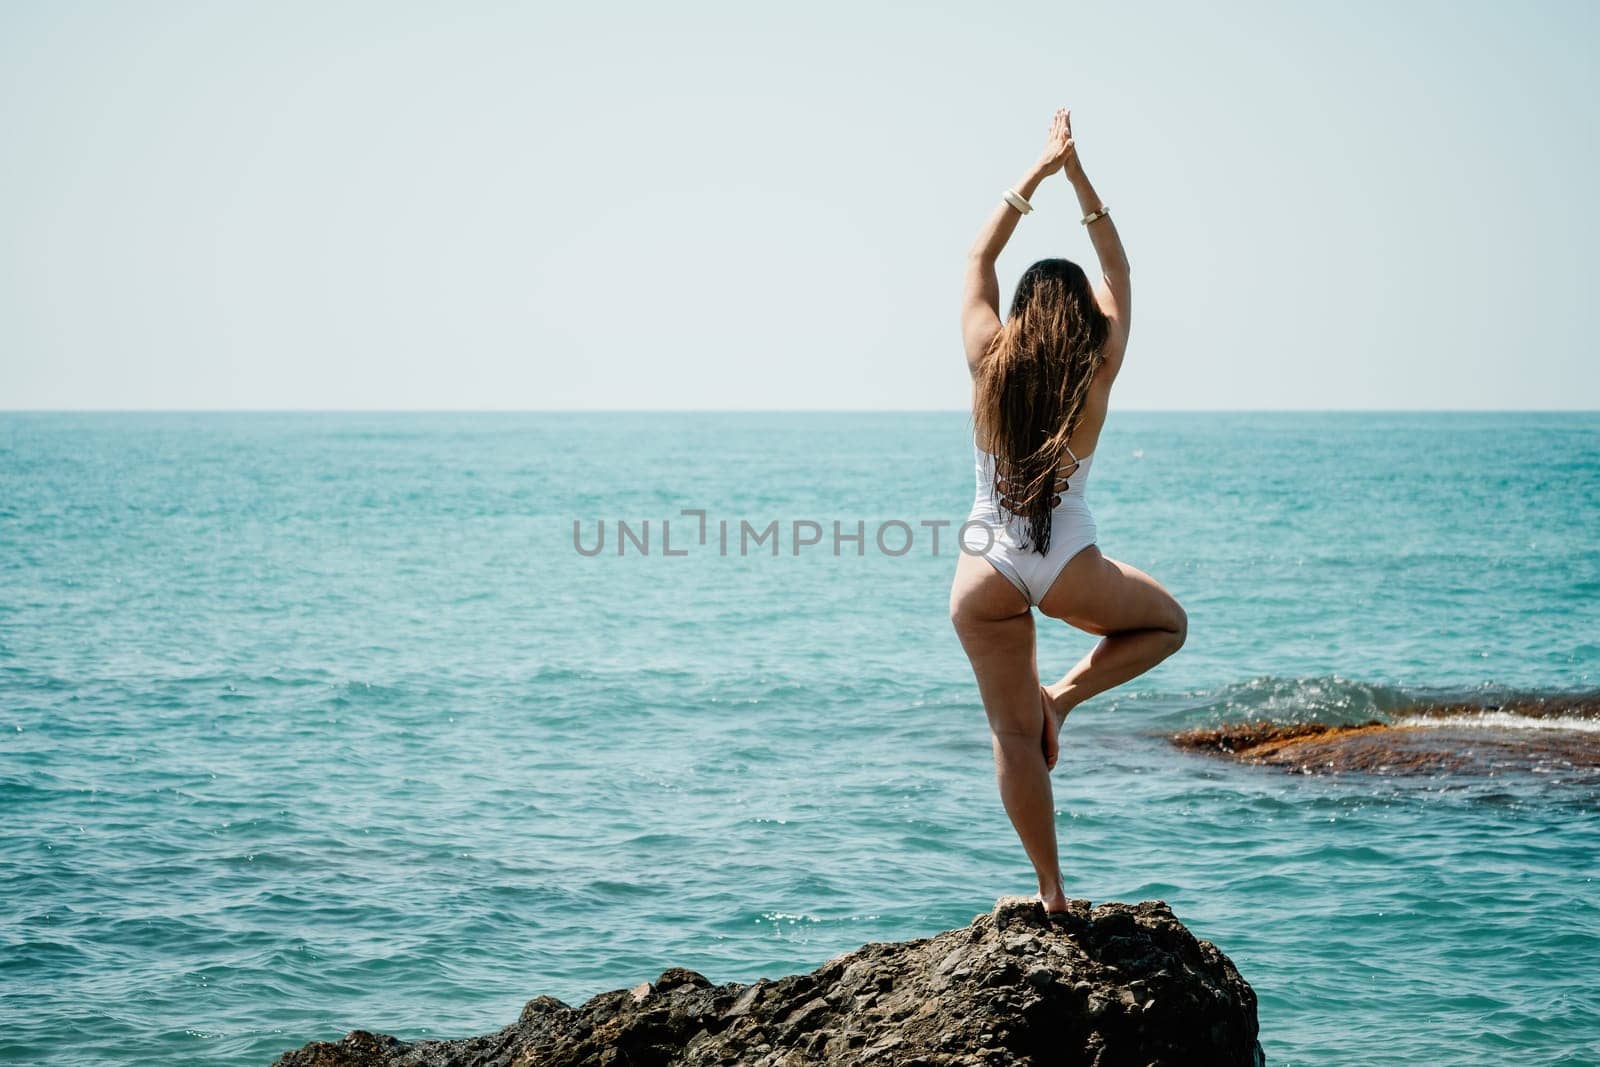 Woman sea yoga. Back view of free calm happy satisfied woman with long hair standing on top rock with yoga position against of sky by the sea. Healthy lifestyle outdoors in nature, fitness concept